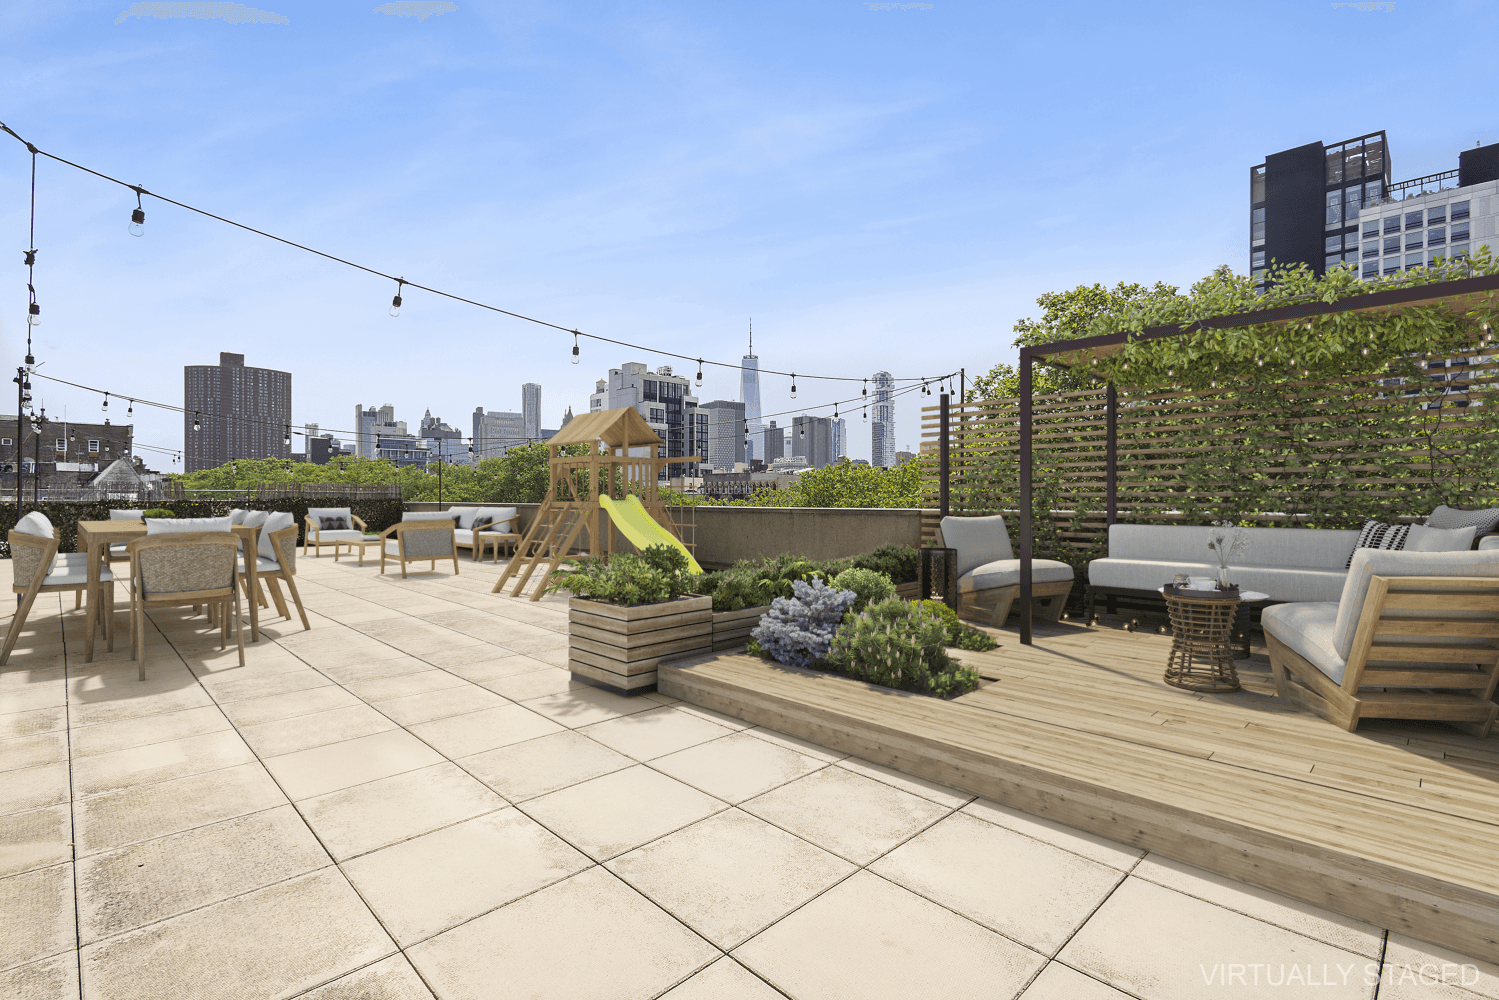 Stunning 3 Bedroom, 3 Full Bath Residence at 38 Delancey with EXPENSIVE Private Terrace spanning over 3, 400 square feet.